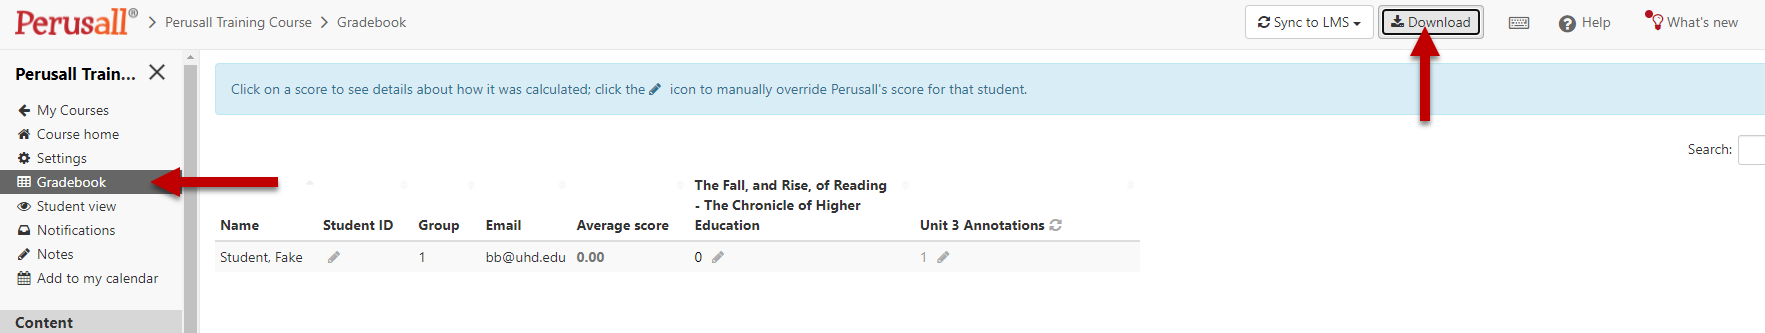 Download grades from the Perusall Gradebook